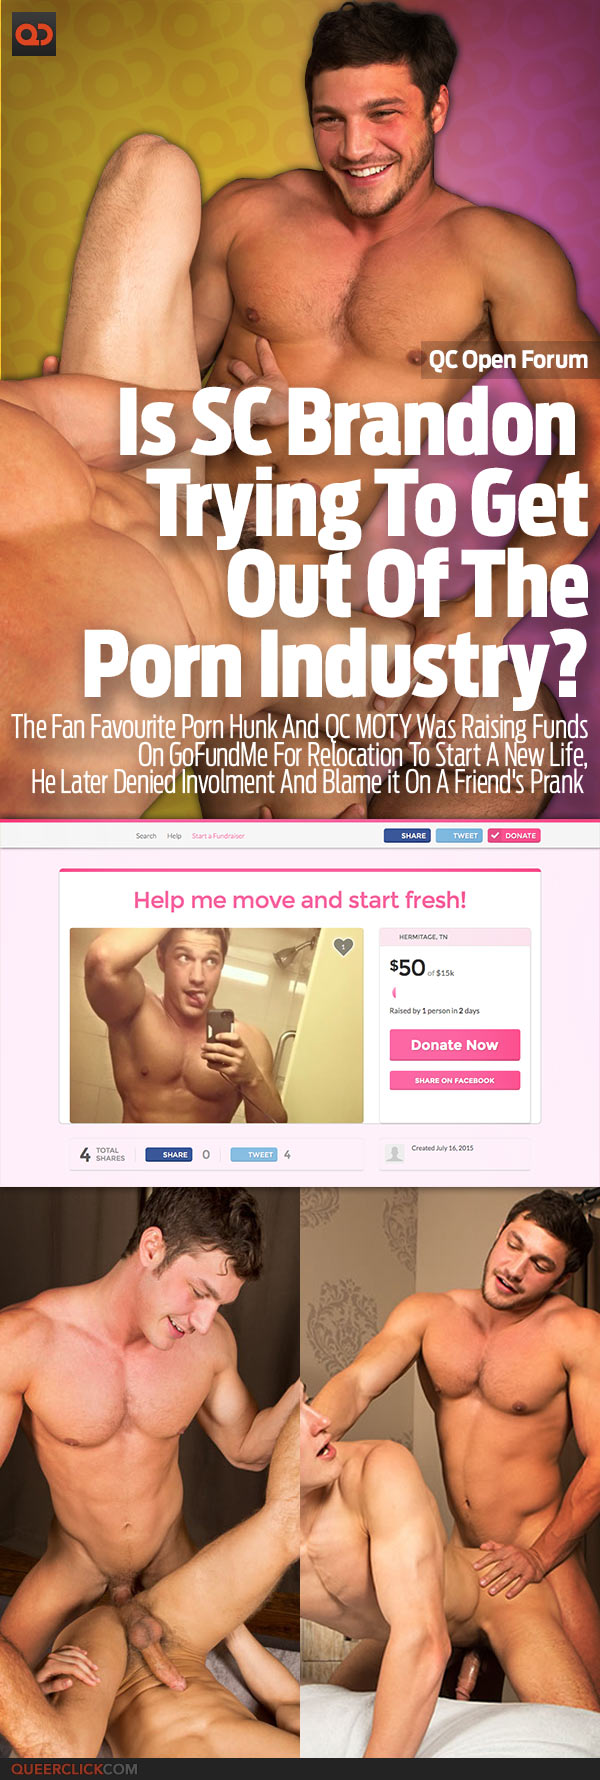 QC Open Forum: Is Sean Cody Brandon Trying To Get Out Of The Porn Industry?